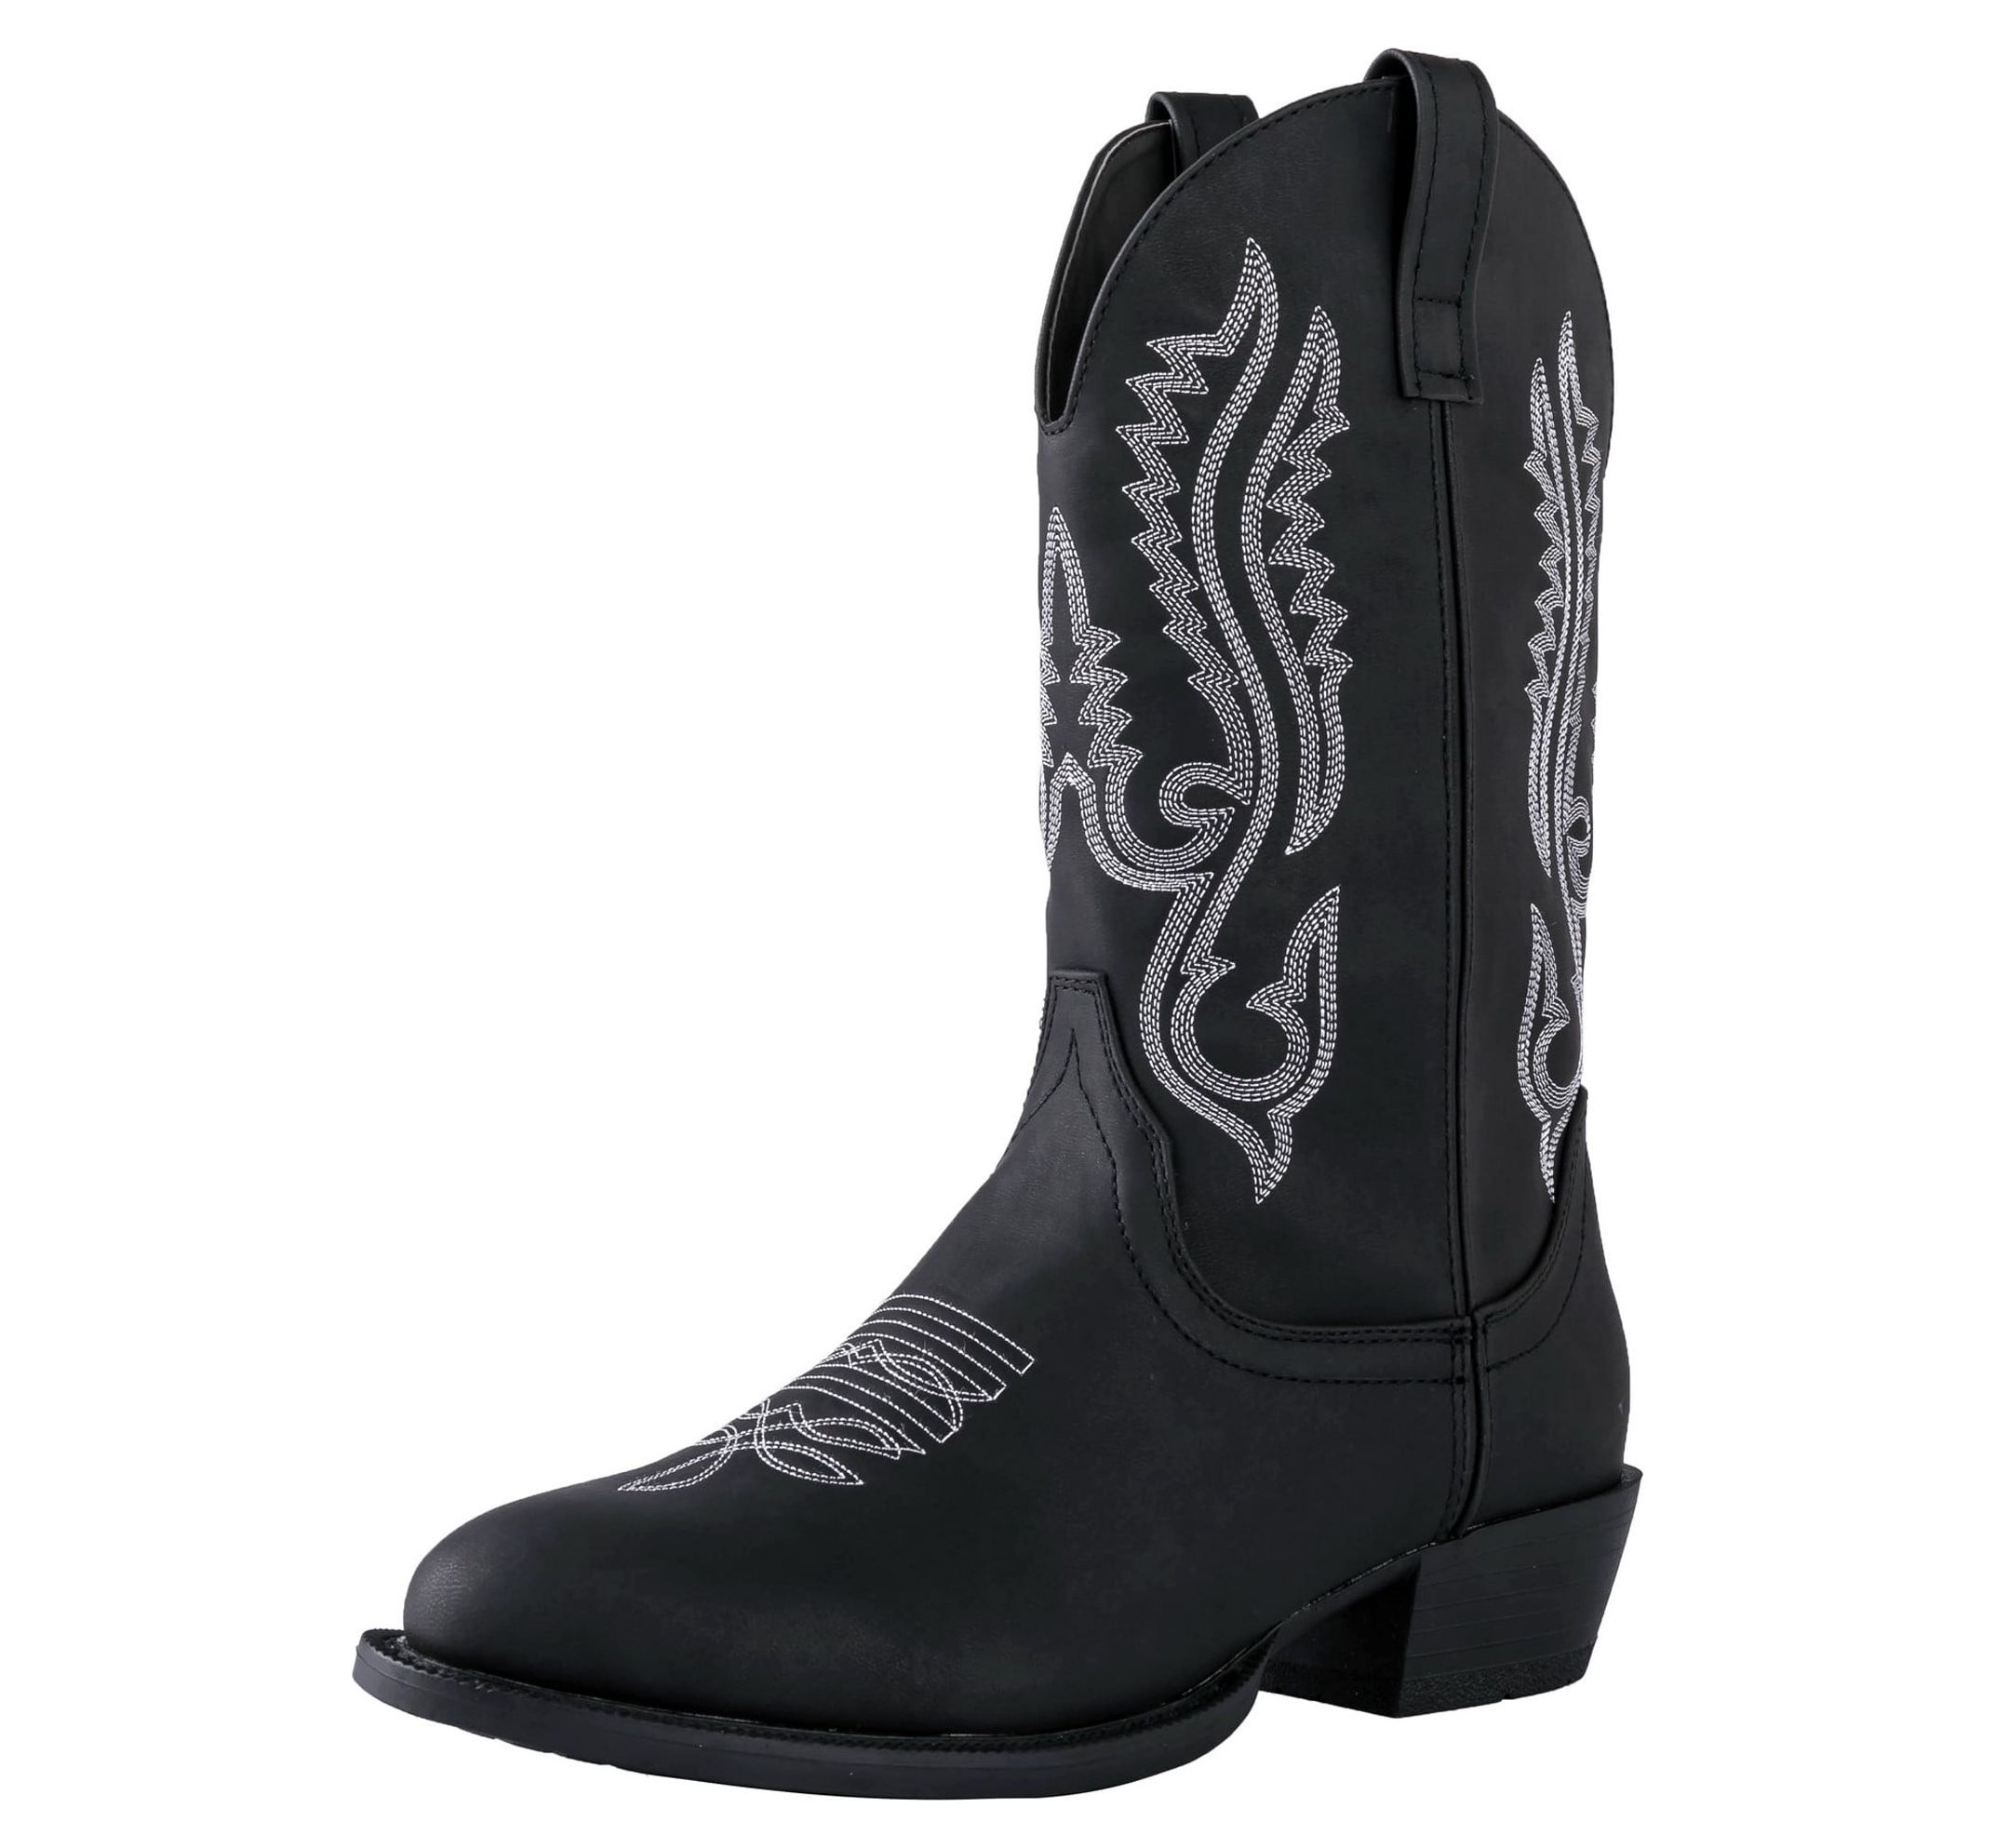 Canyon Trails Mens Classic Durable Round Toe Embroidered Western Rodeo Cowboy Boots - image 2 of 7